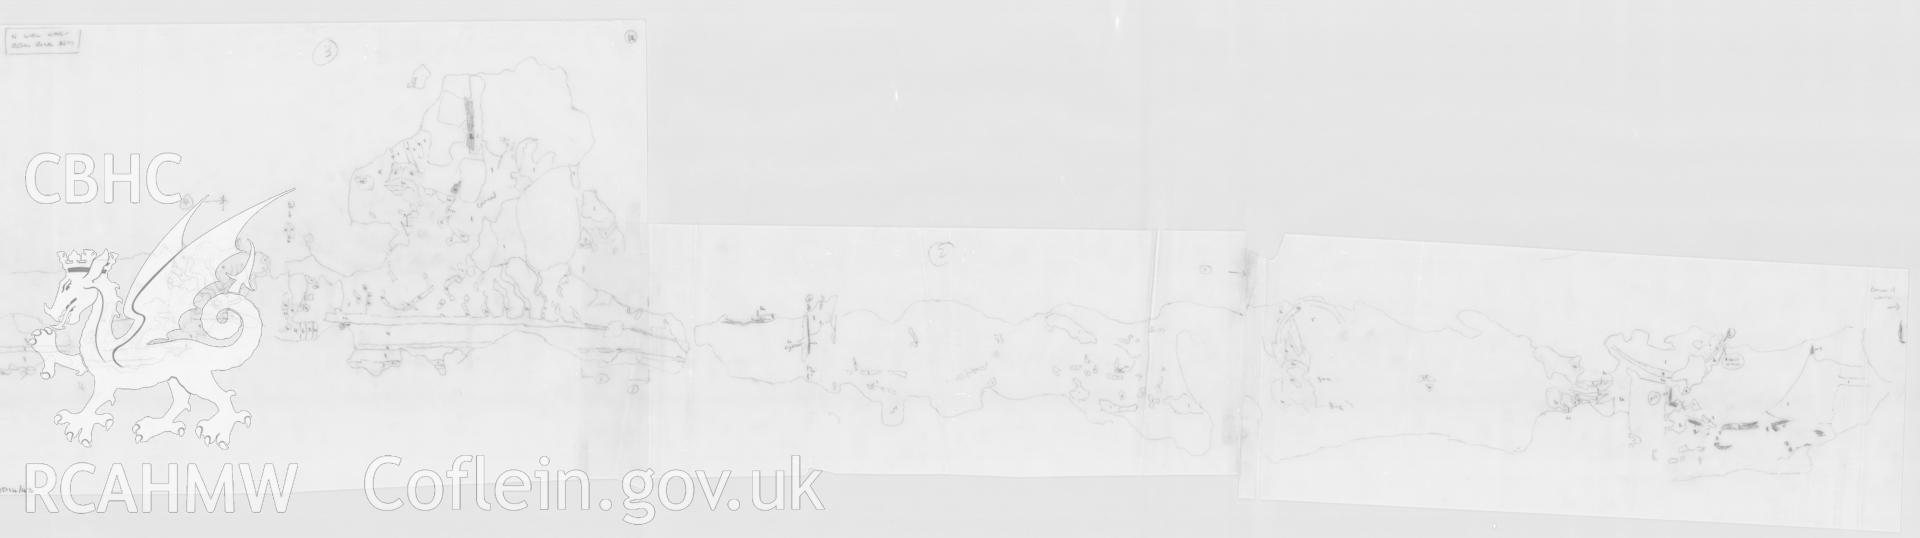 Provisional sketch on tracing paper showing the wall painting on the north wall of the nave, in St Teilo's Church, Llandeilo Talybont, produced by D.J. Roberts and A.J. Parkinson, undated.